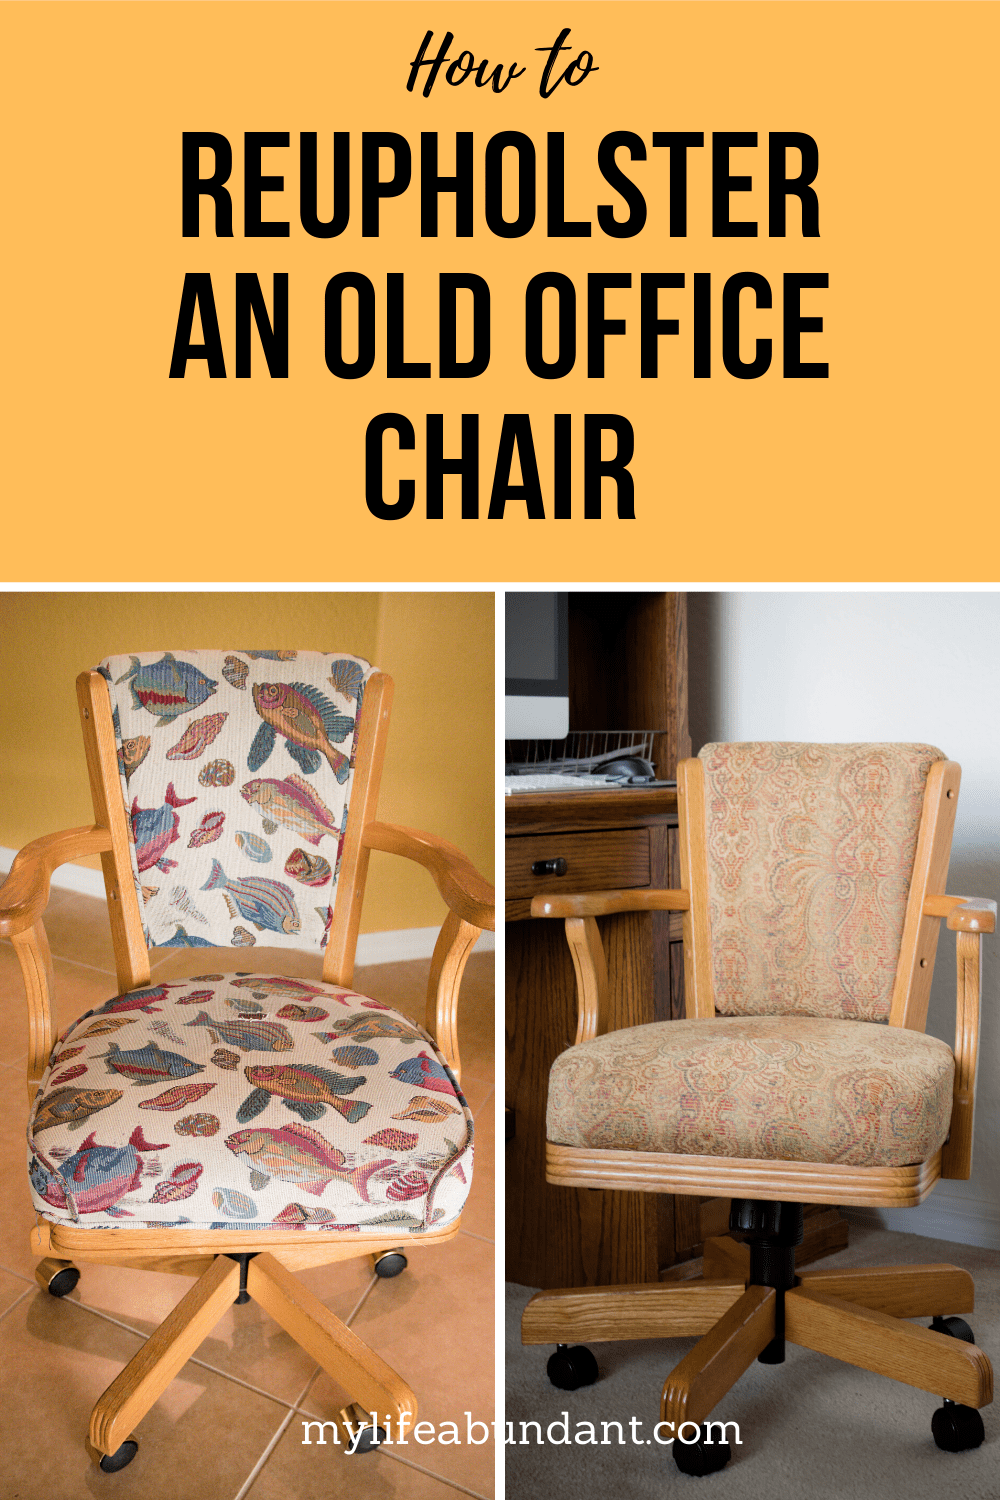 How to Reupholster an Old Office Chair - My Life Abundant